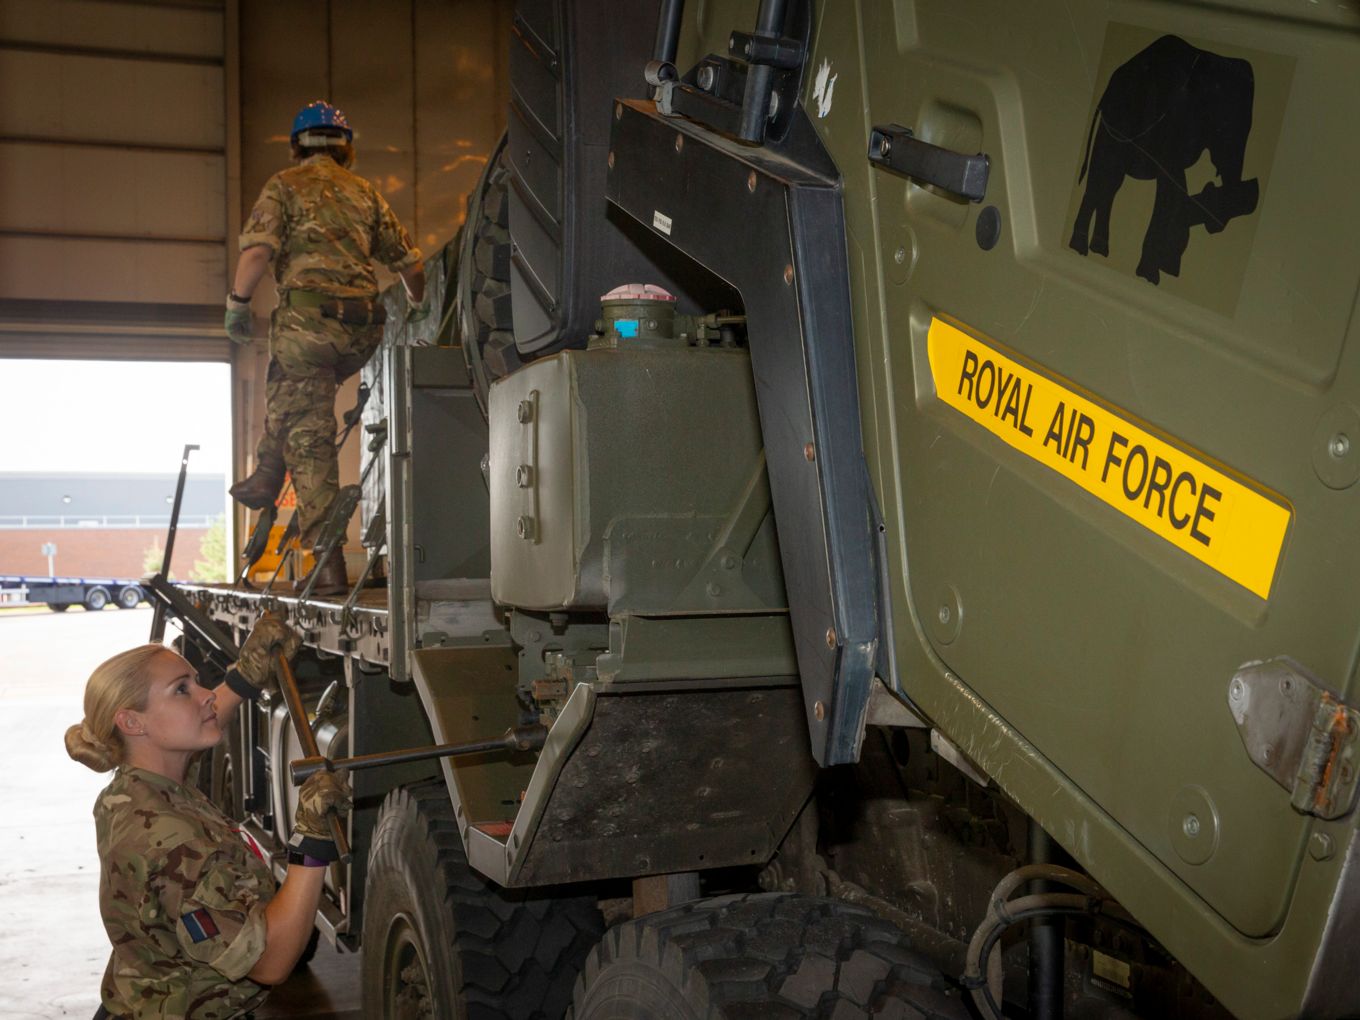 Personnel from No 2 Mechanical Transport Squadron working on vehicles similar to those deployed to Exercise Said Sareea.